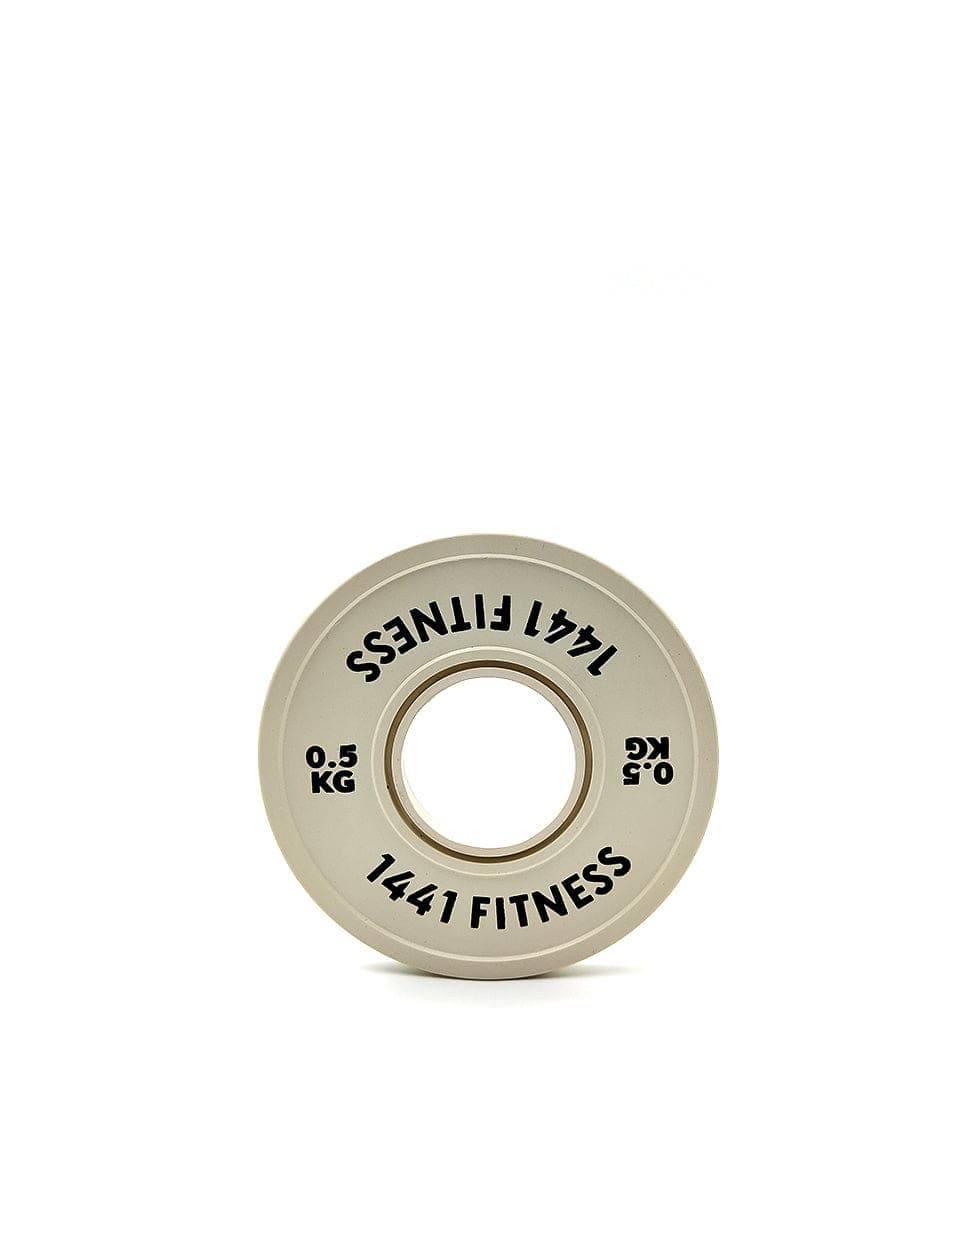 PRSAE Plates & Bars 0.5 KG 1441 Fitness Fractional Bumper Weight Plates 0.5 kg to 2.5 Kg - Sold as Per Piece